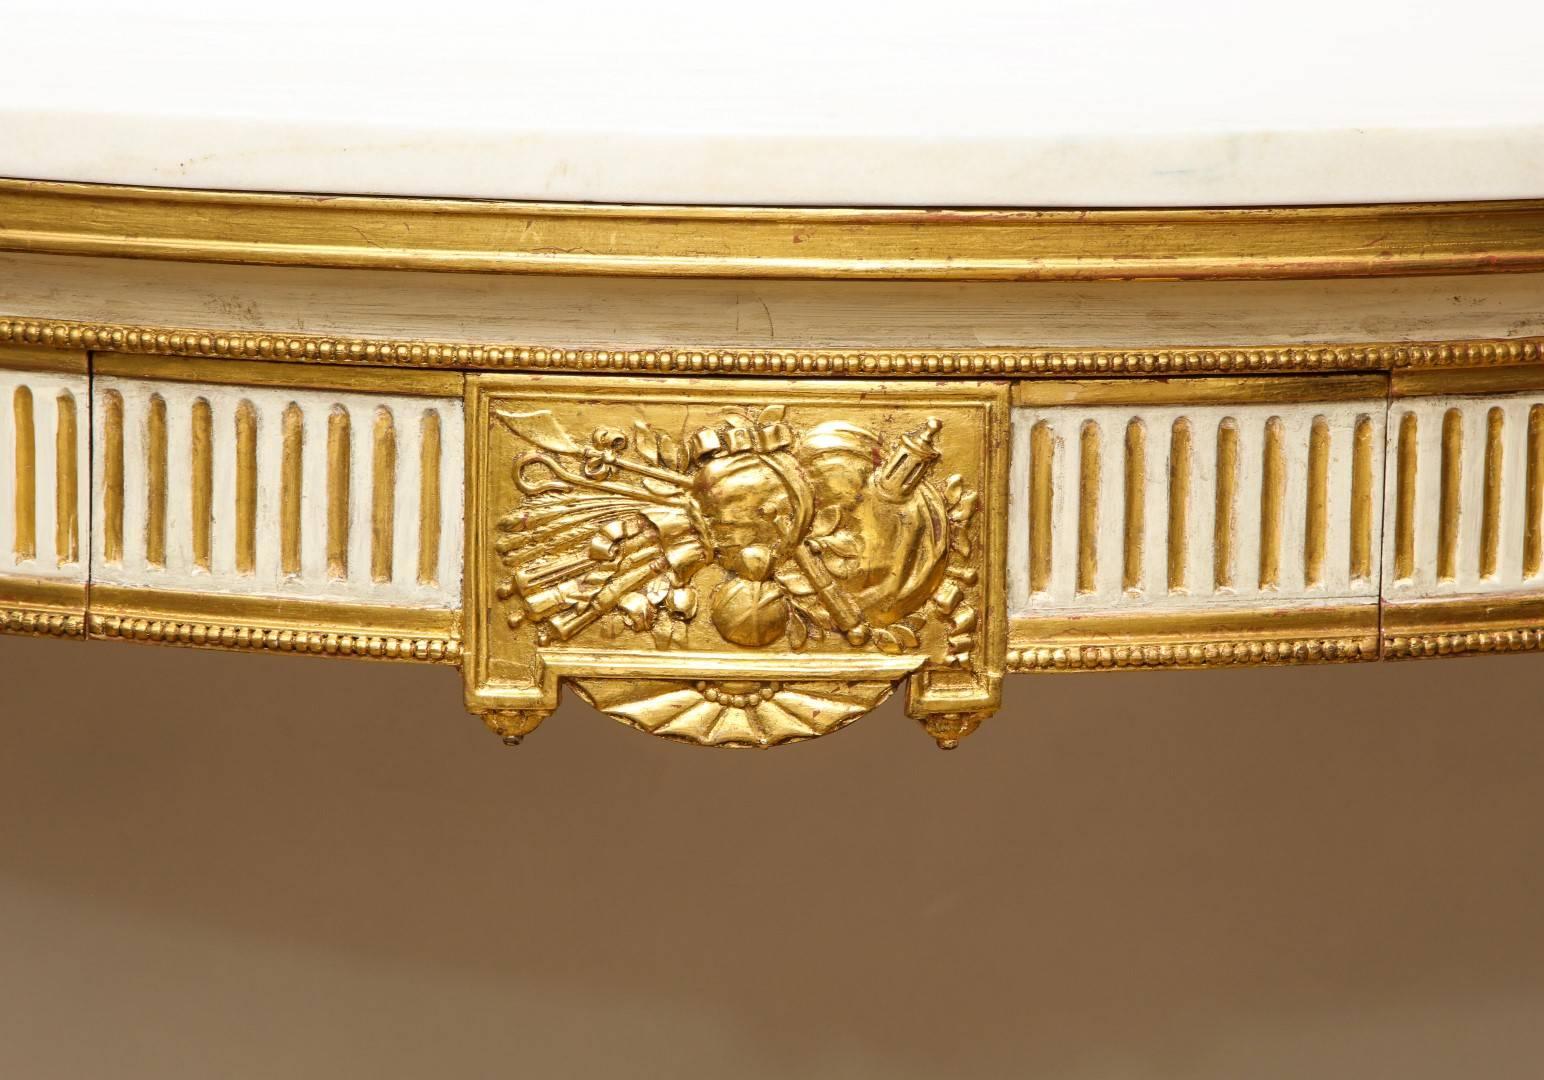 A French Louis XVI style demilune console, with a drawer in the apron, having gilt fluting and beaded edge. The centre of the shaped apron with rectangular trophy medallion below gilt molded edge and Rosa Aurora marble tops. The four round tapering